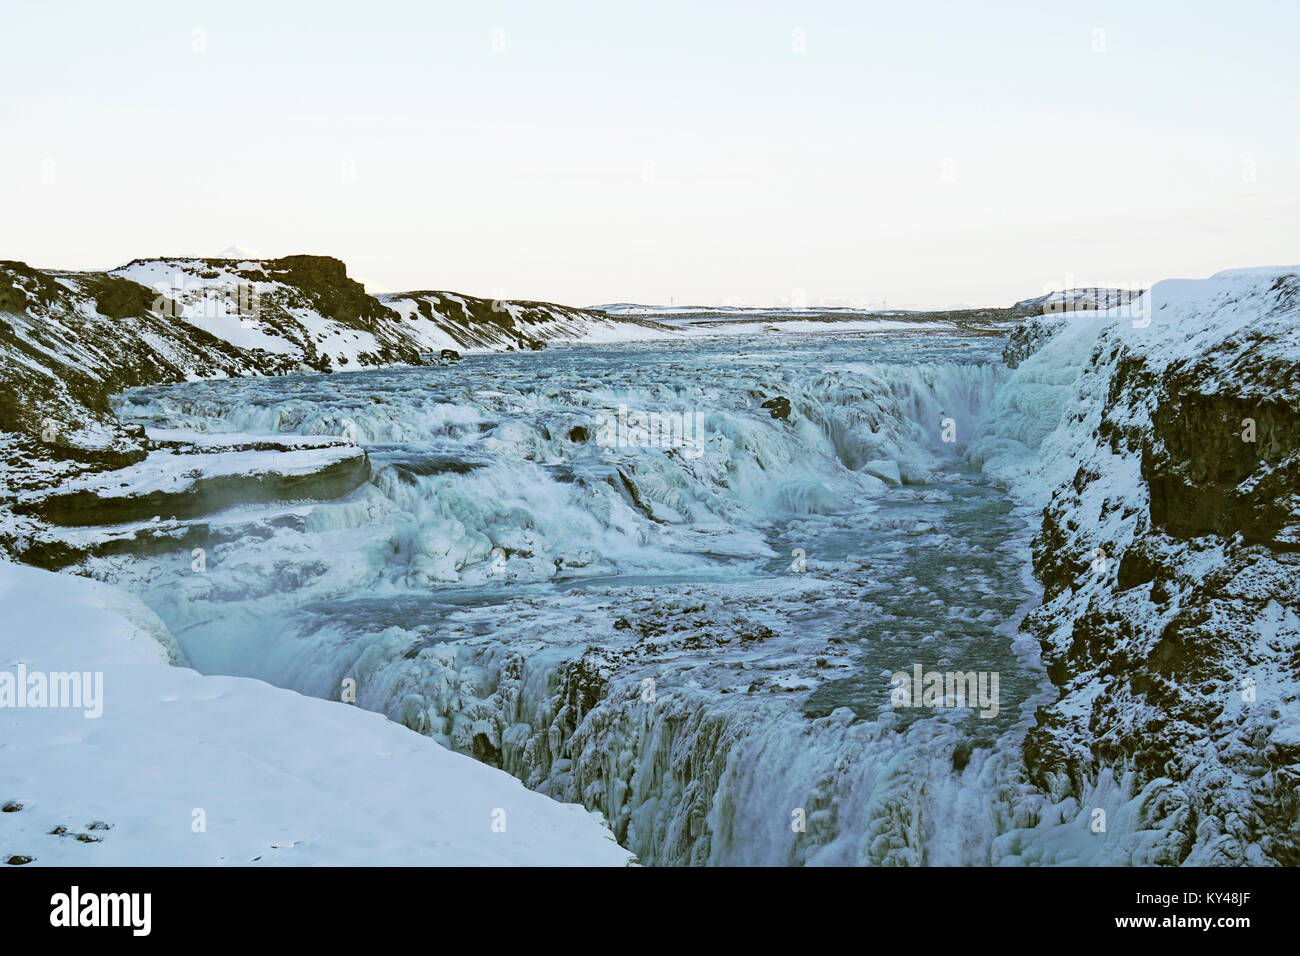 Image of the Gulfoss Waterfalls on the Hvita Olfusa river in Iceland during Winter. The falls are a much visited tourist attraction in Iceland on the Golden Circle. 2018 image Stock Photo